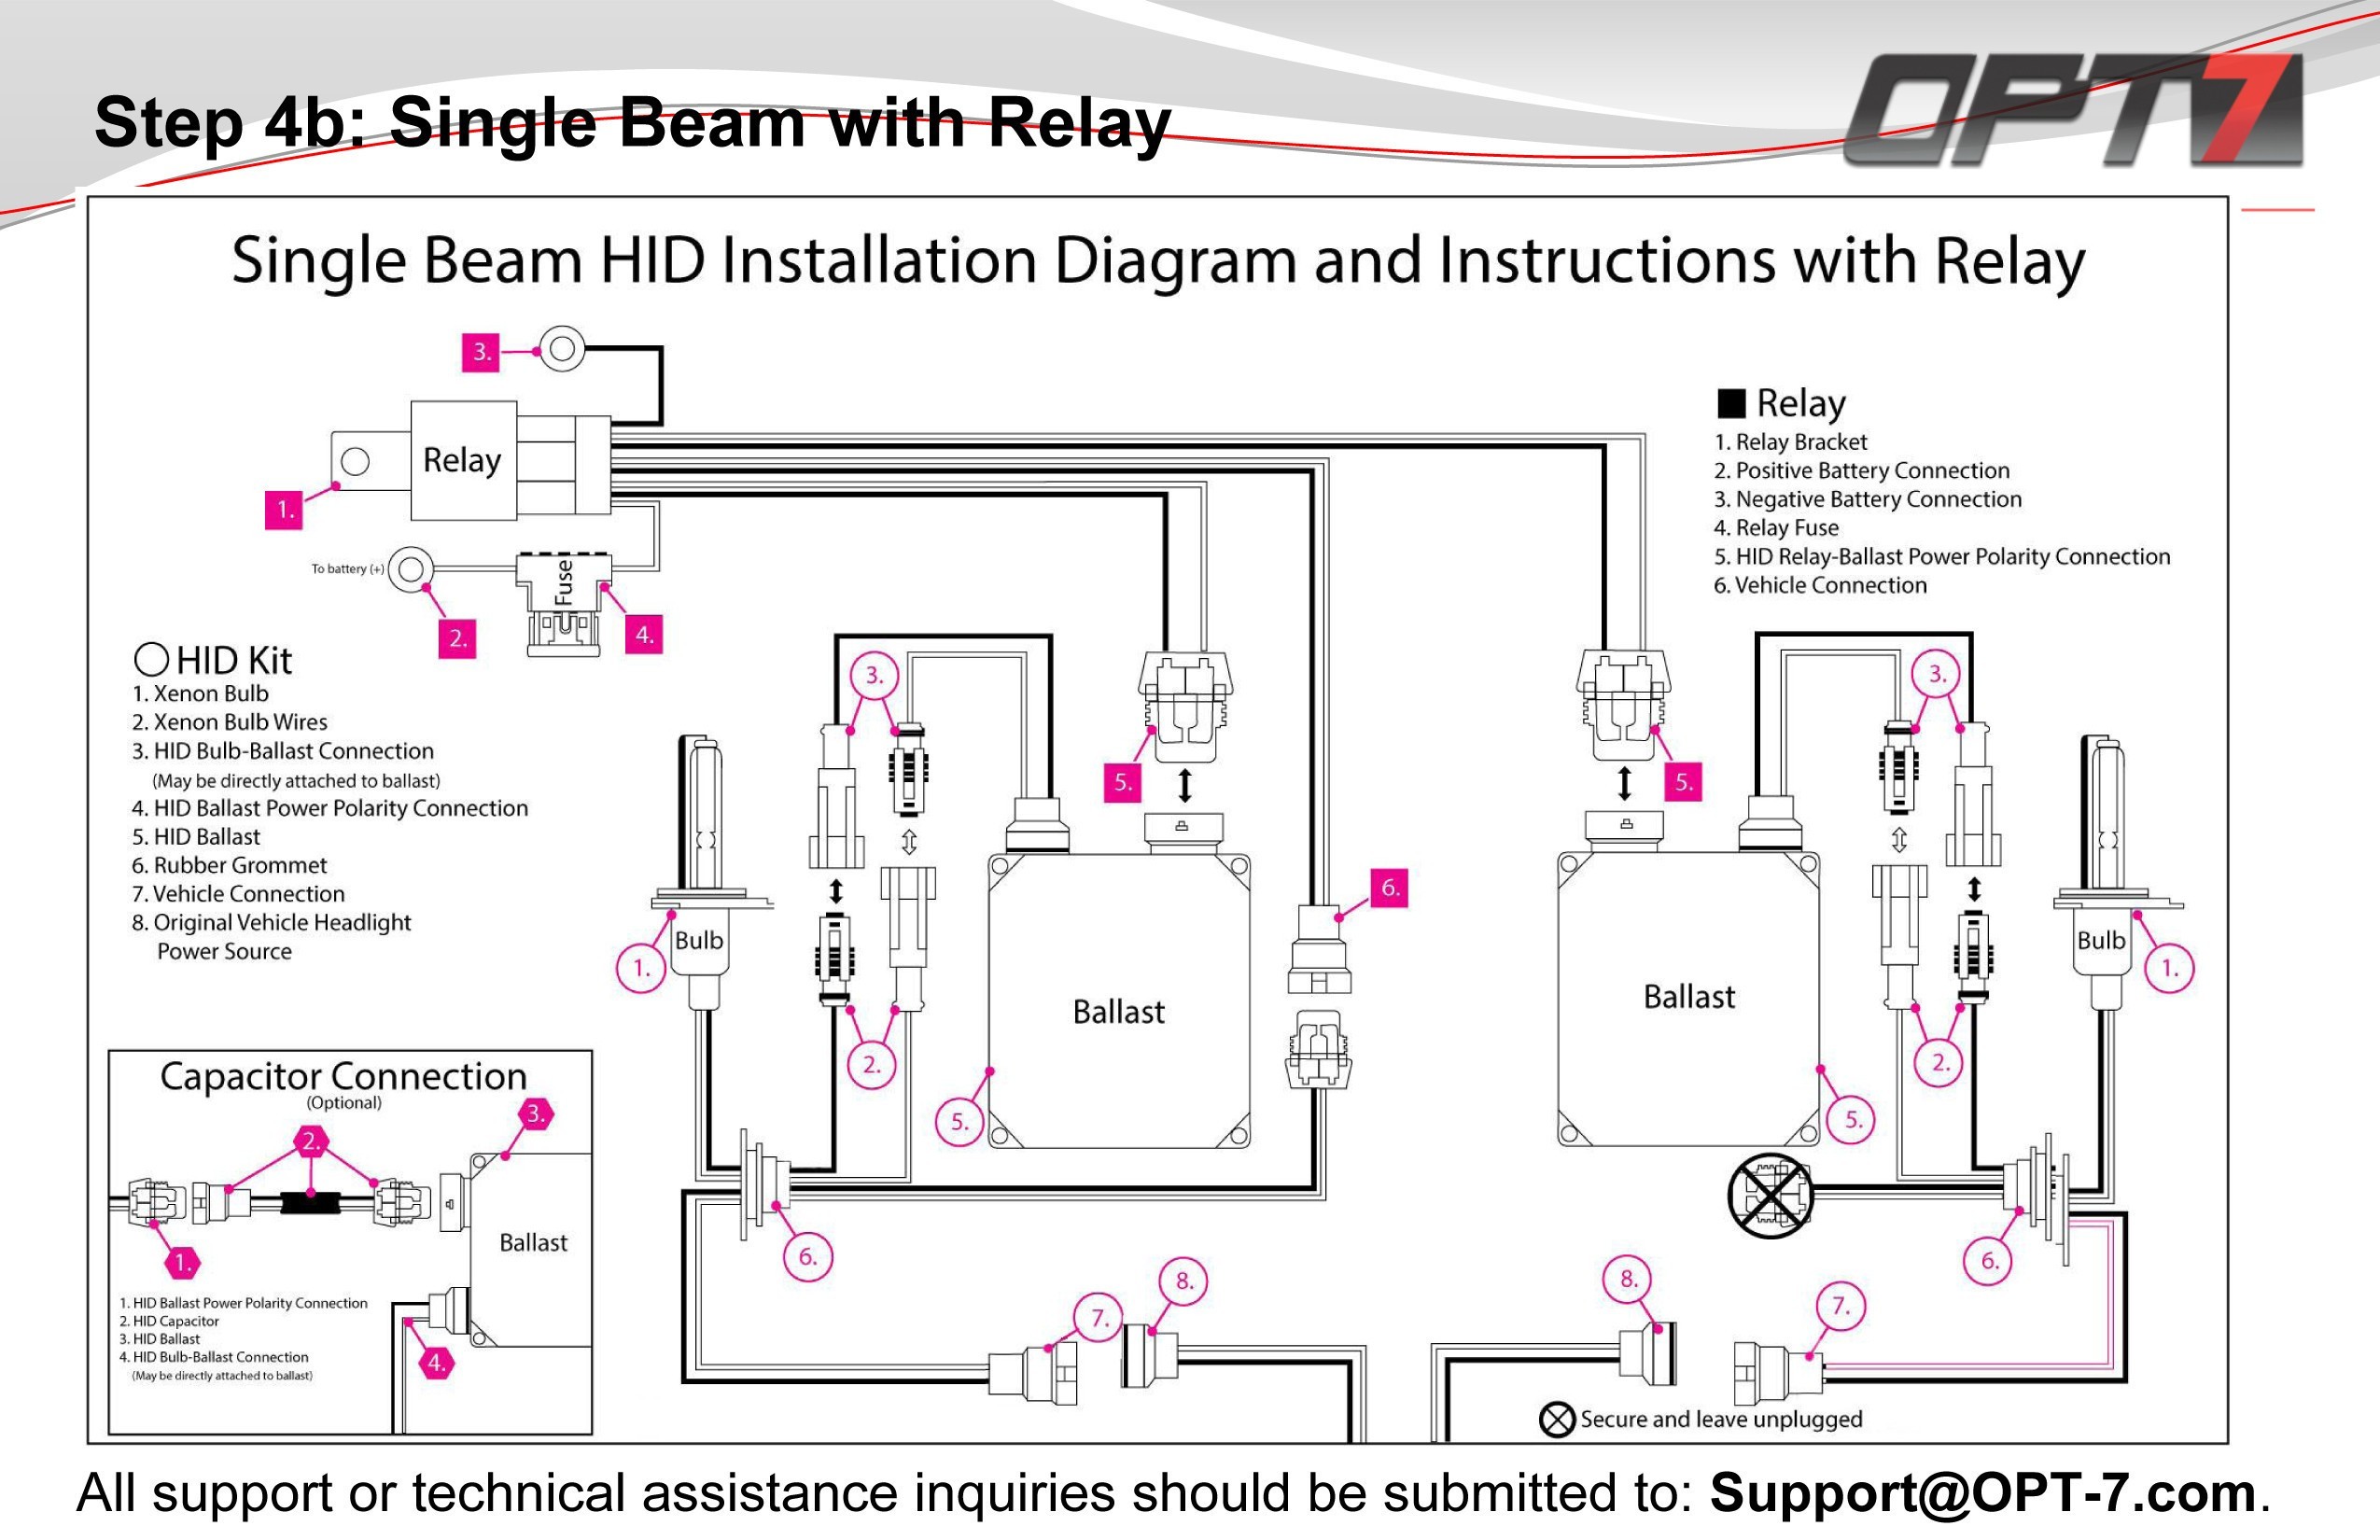 hid wiring diagram with relay Download Wiring Diagram for Hid Relay Valid Hid Wiring Diagram